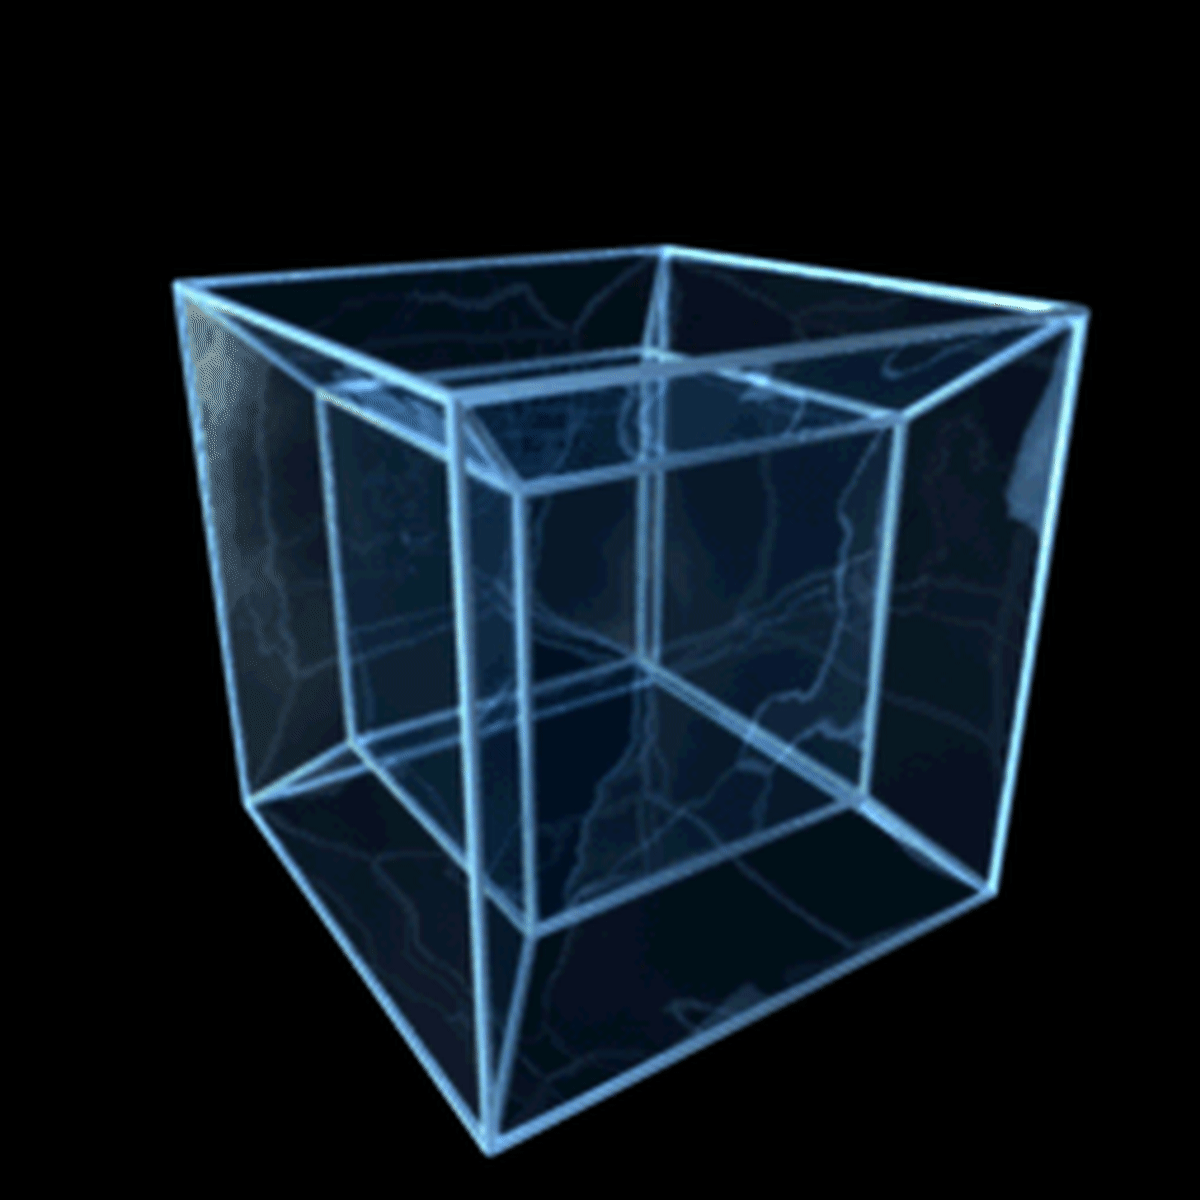 A 3D projection of an 8-cell Tesseract performing a simple rotation about a plane which bisects the figure from front-left to back-right and top to bottom